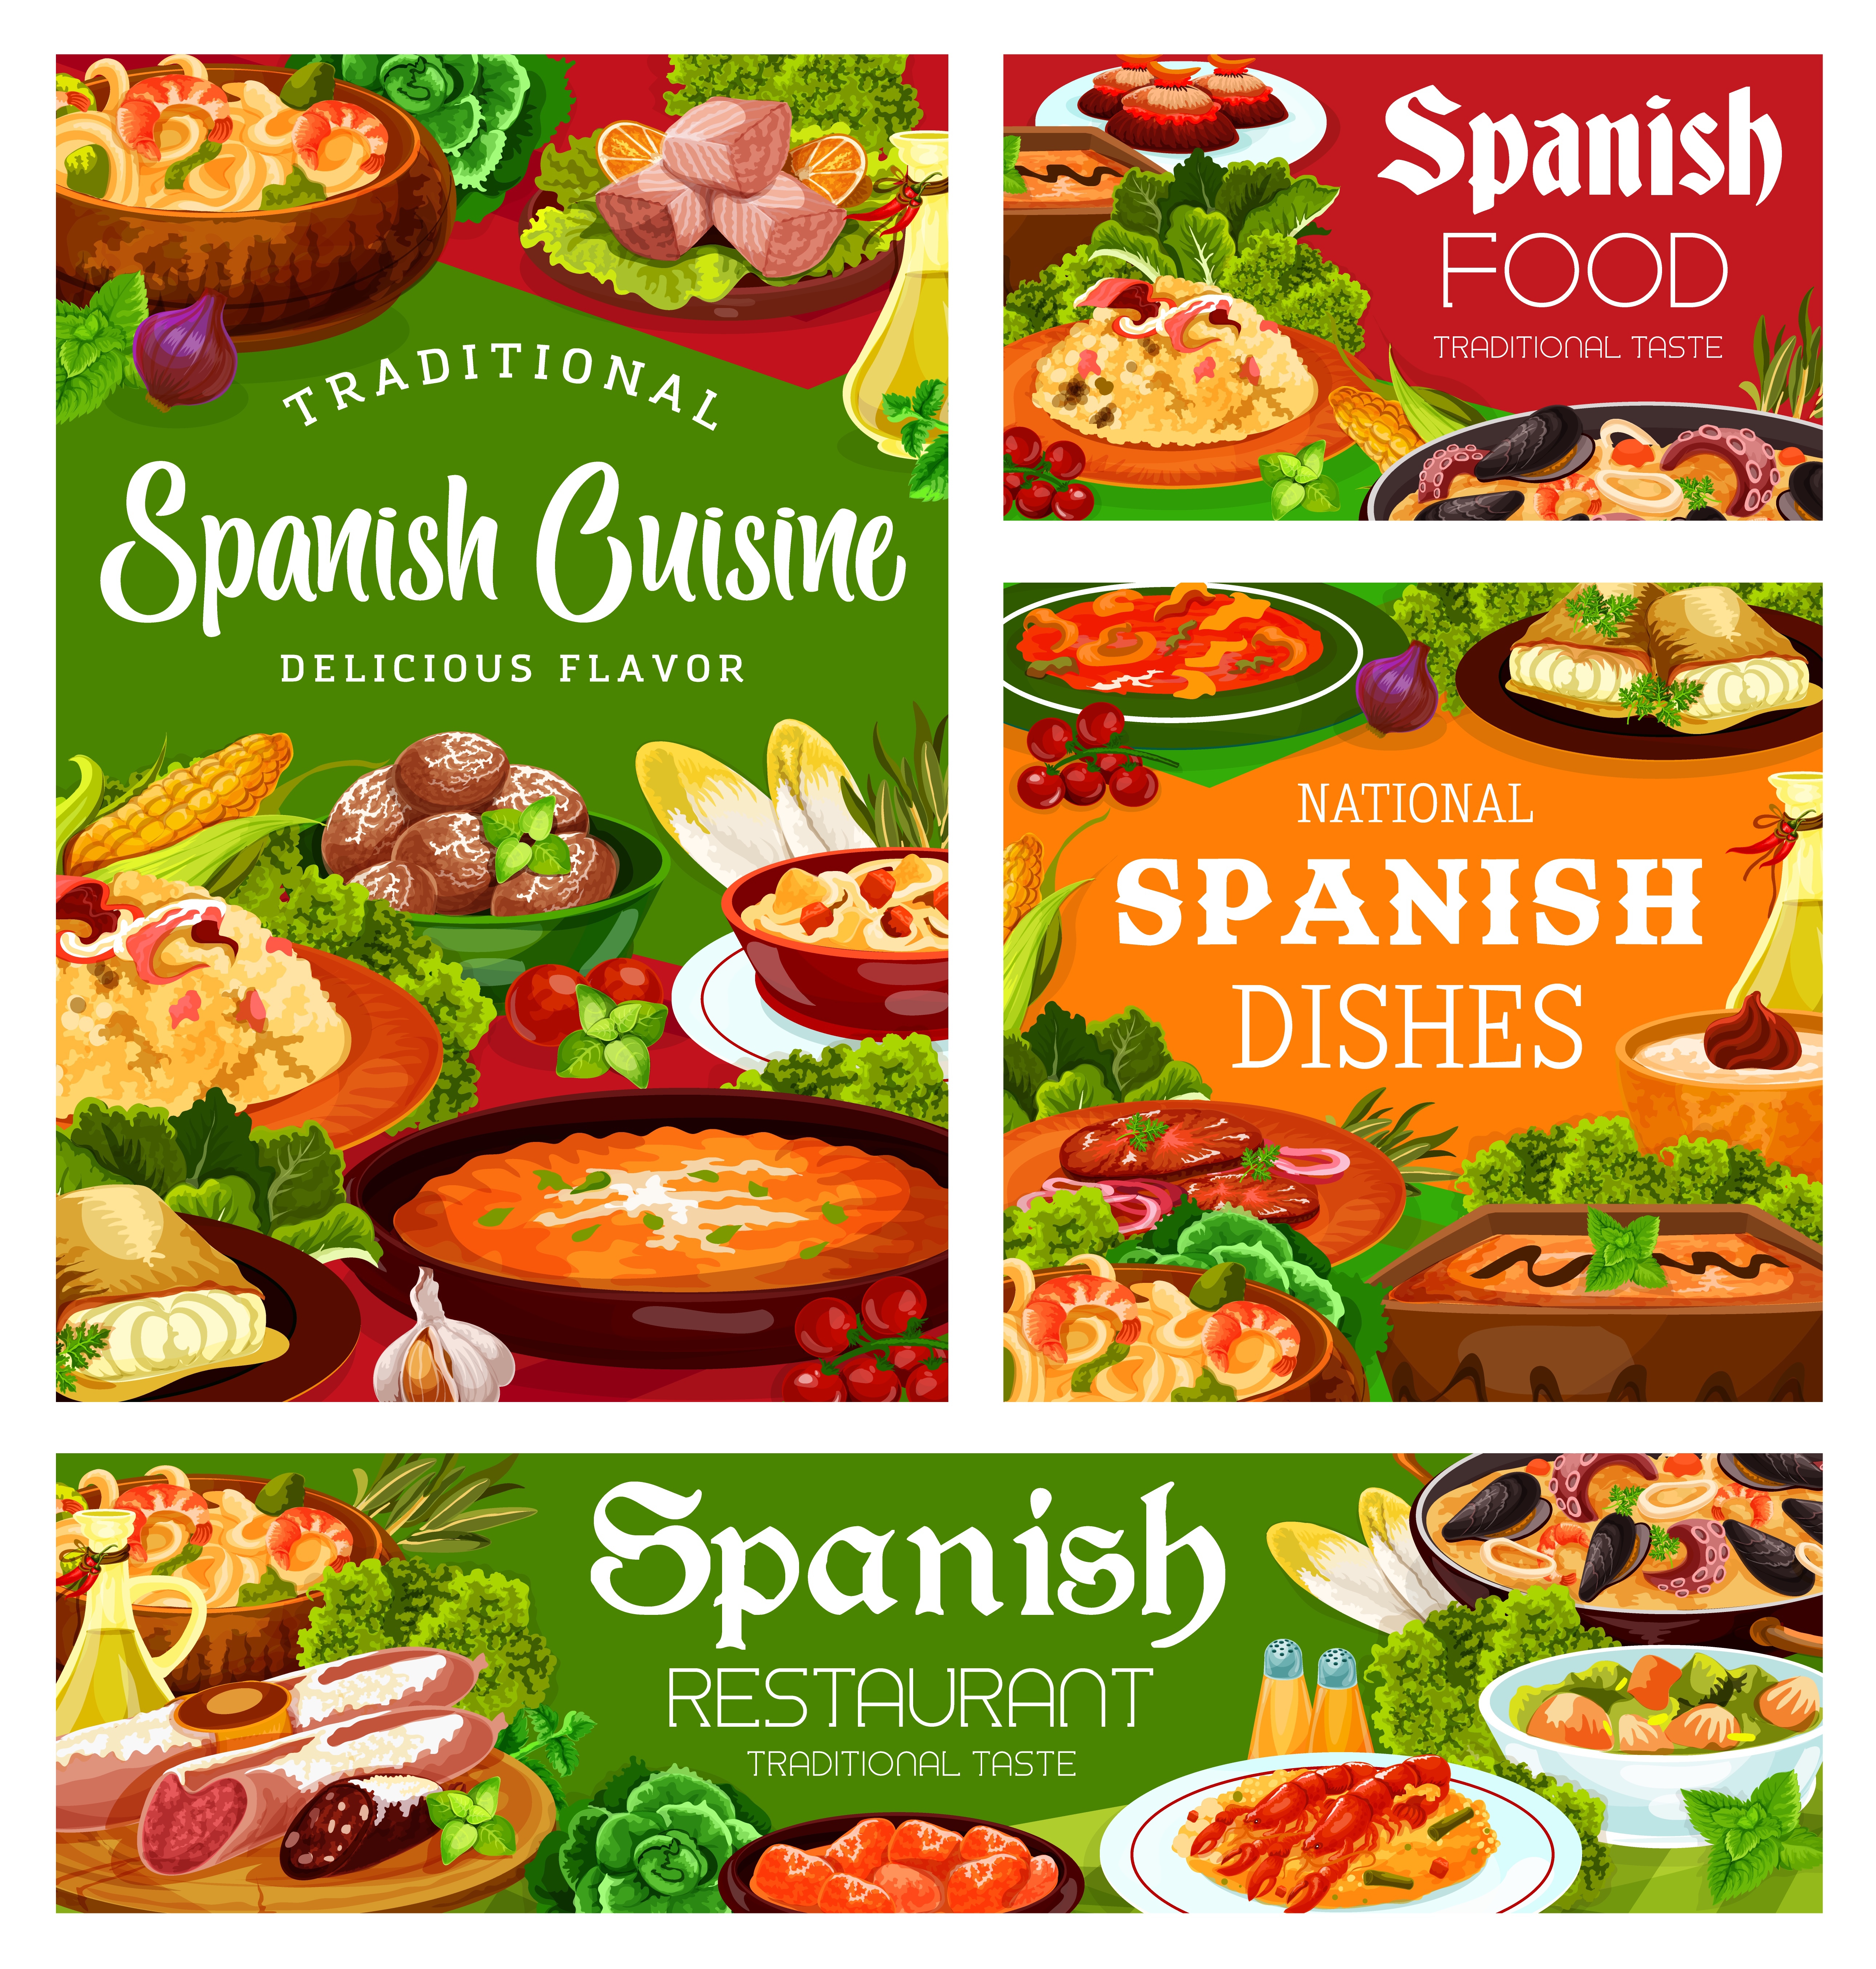 Spanish cuisine food, menu meals and dishes, Spain restaurant meat, paella and snacks tapas, vector. Spanish food seafood and fish paella, lunch and dinner, traditional sausages and pastry. Spanish cuisine food, menu meals and dishes, Spain